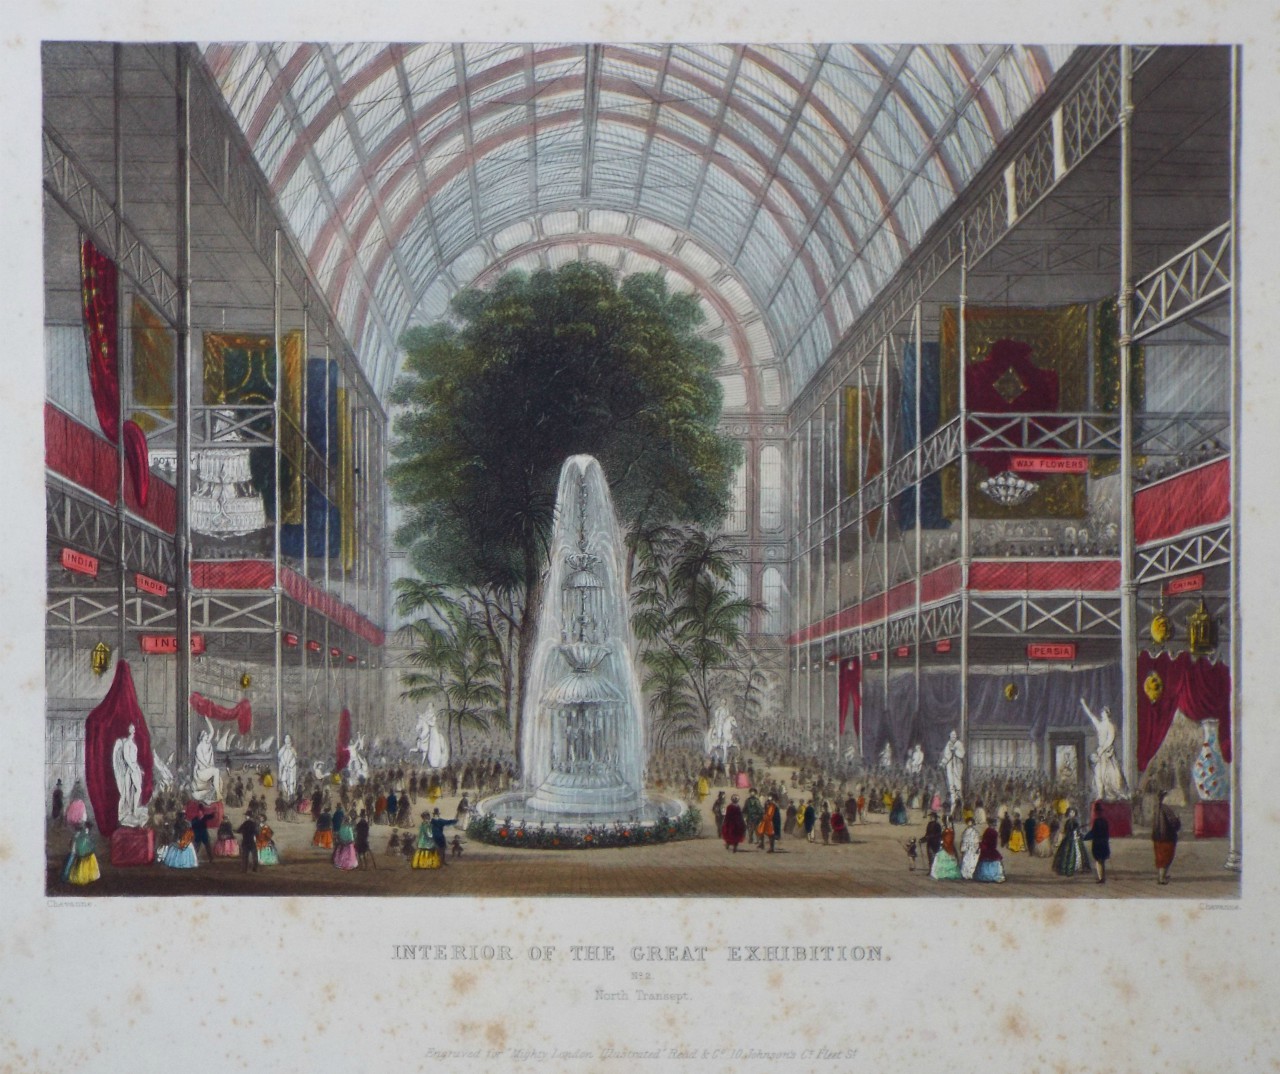 Print - Interior of the Great Exhibition. No.2. North Transept. - 